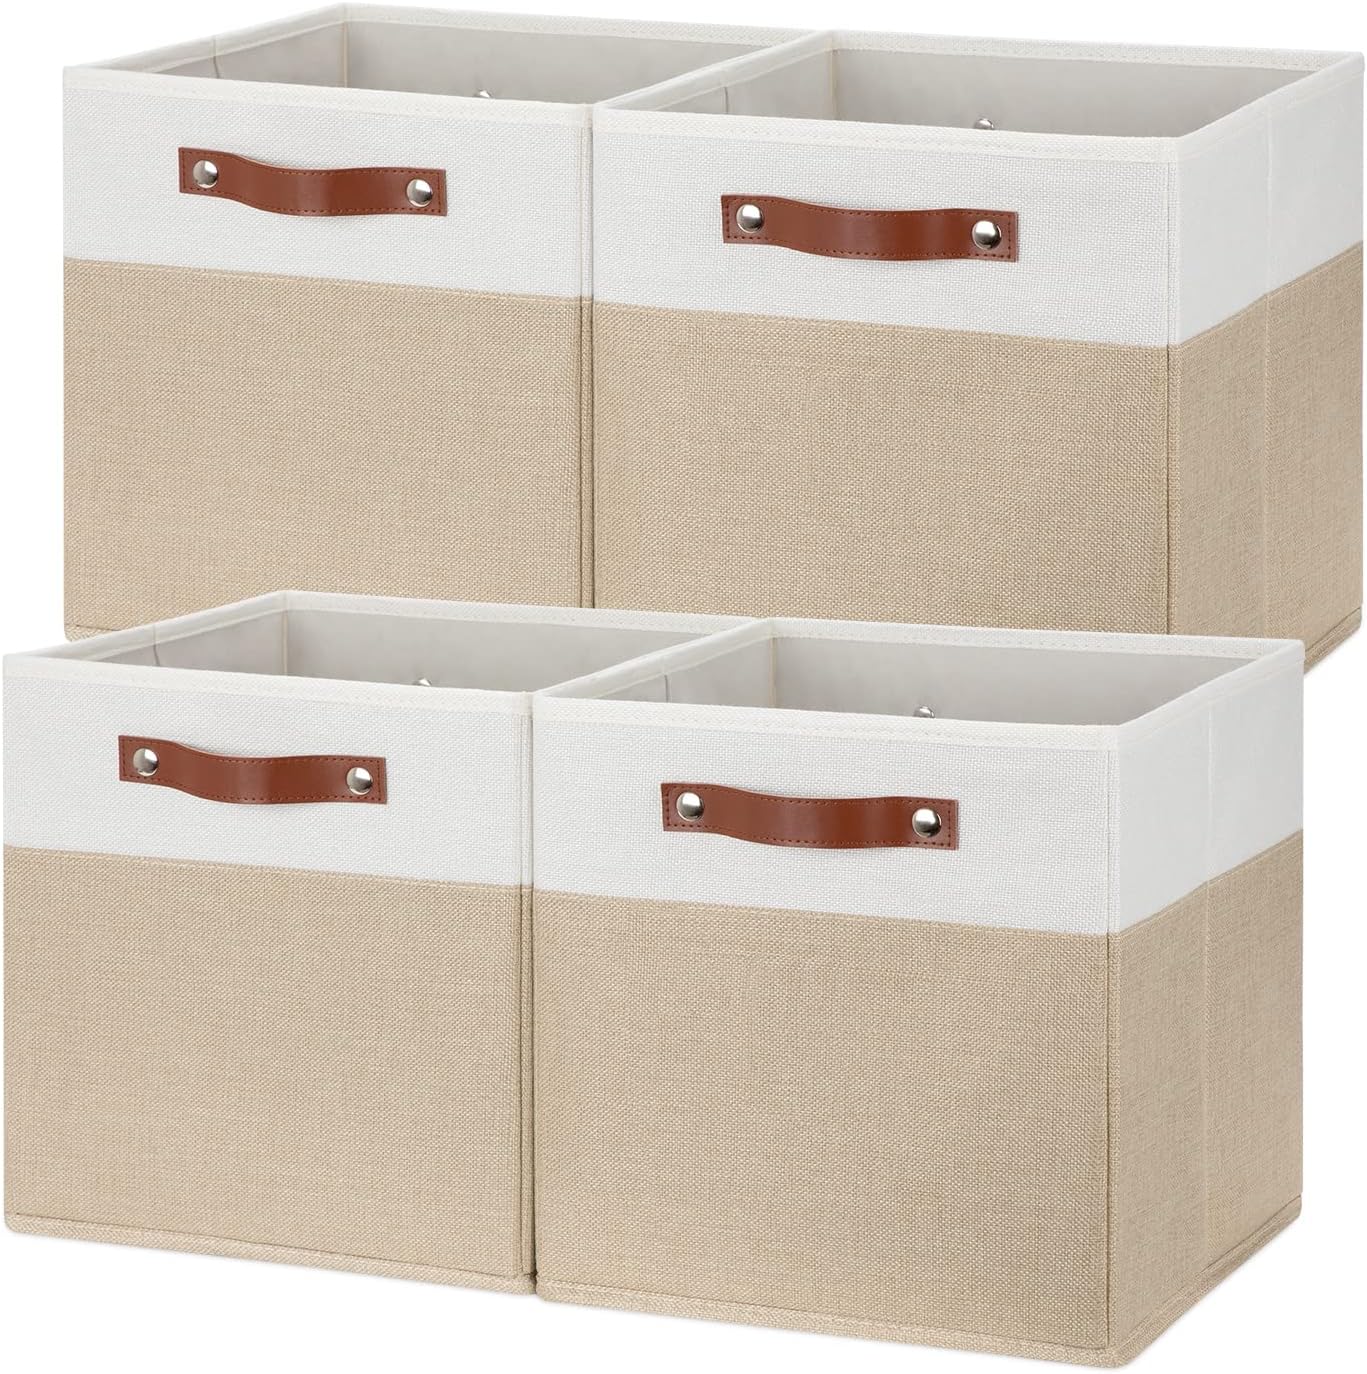 Temary Fabric Storage Cubes 12 Inch Cube Storage Bins 4Pack Empty Gift Baskets Storage Baskets for Organizing, Collapsible Fabric Bins for Shelves, Closets, Nursery (White & Khaki)